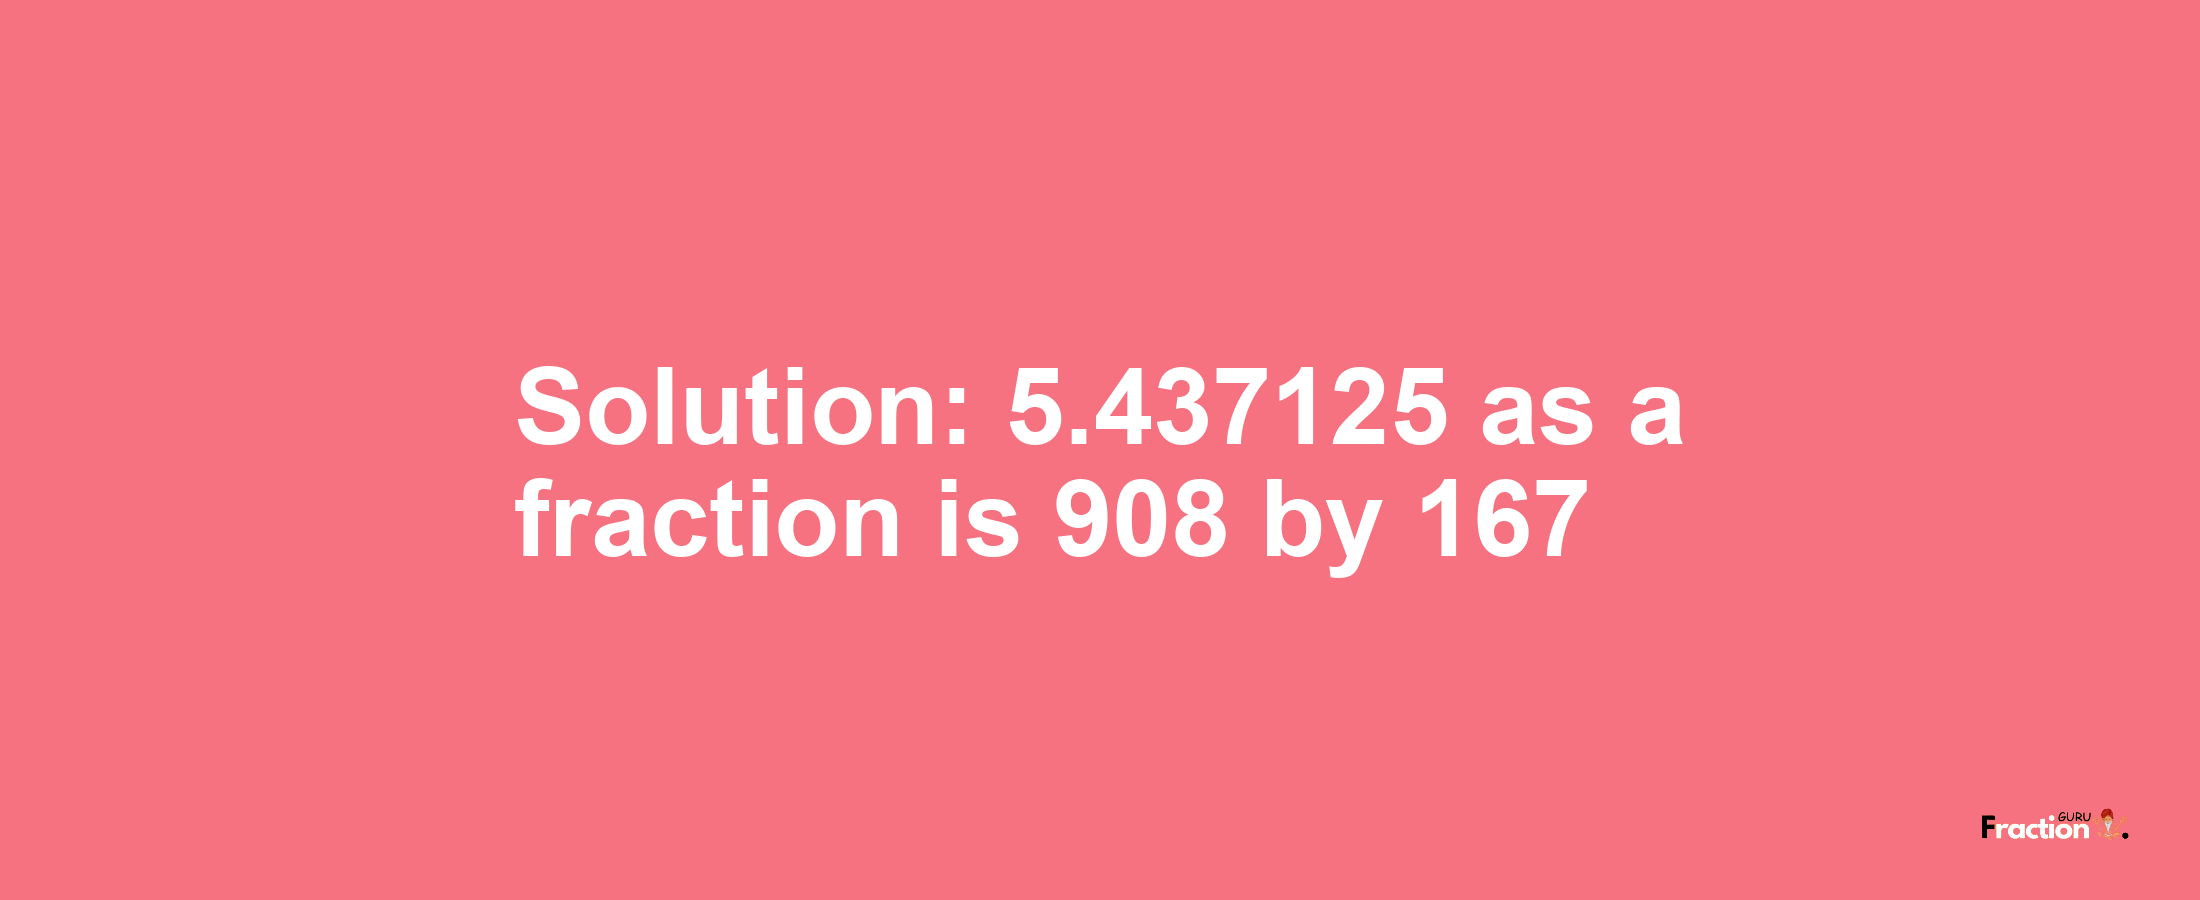 Solution:5.437125 as a fraction is 908/167